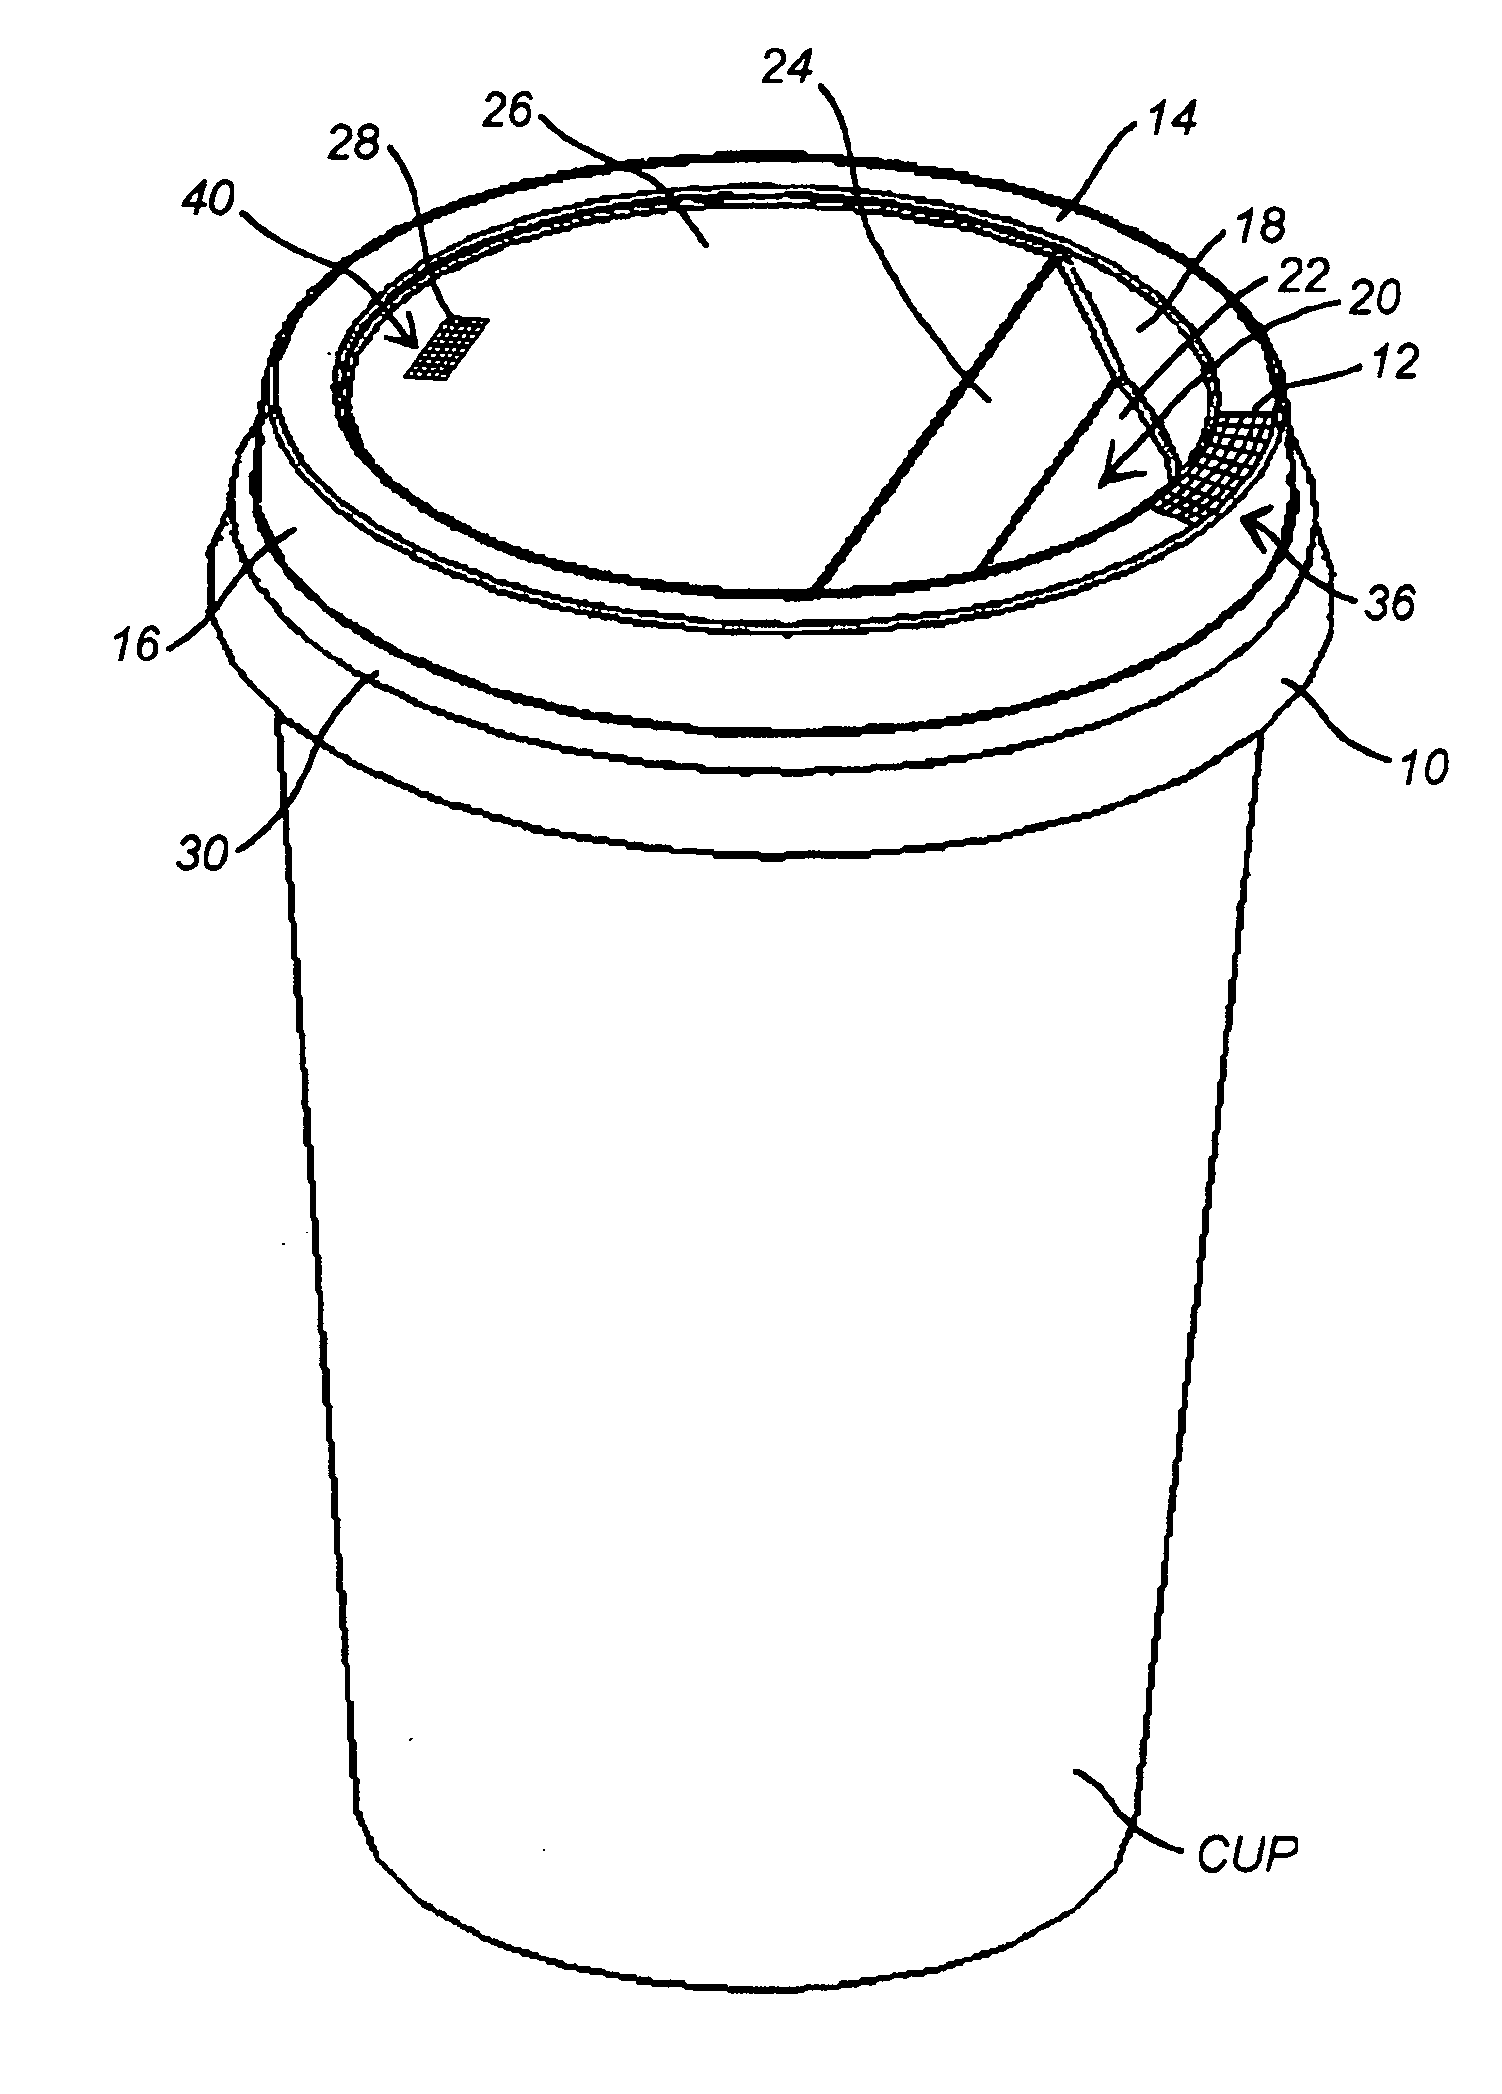 Dripless lid for beverage container